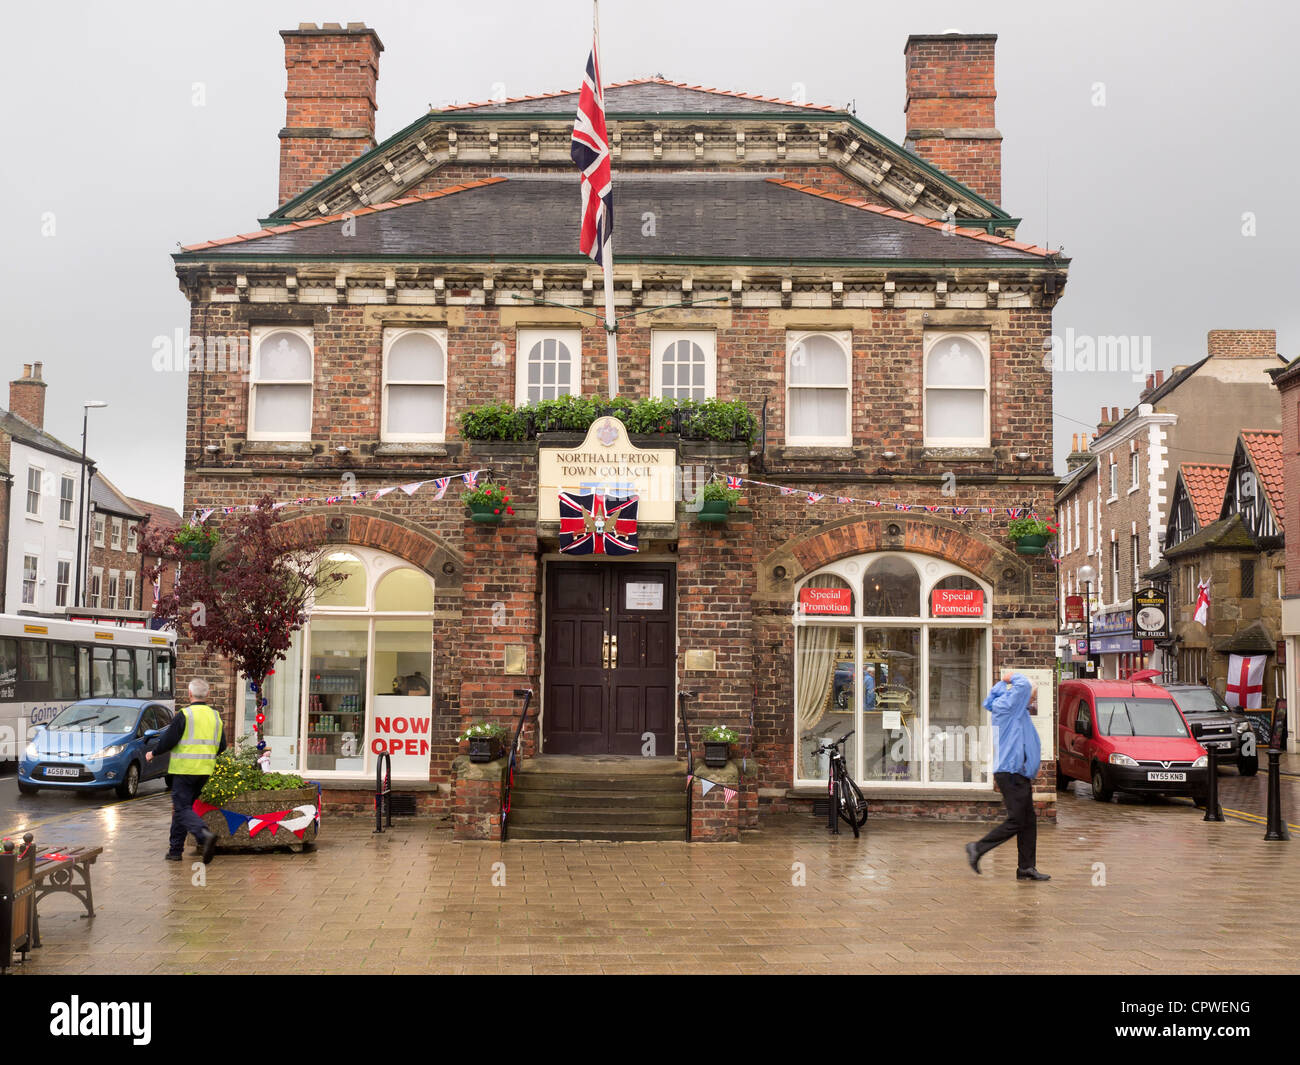 Town Council Offices High Street Northallerton North Yorkshire decorated for Queen's Diamond Jubilee Celebration on a rainy day Stock Photo